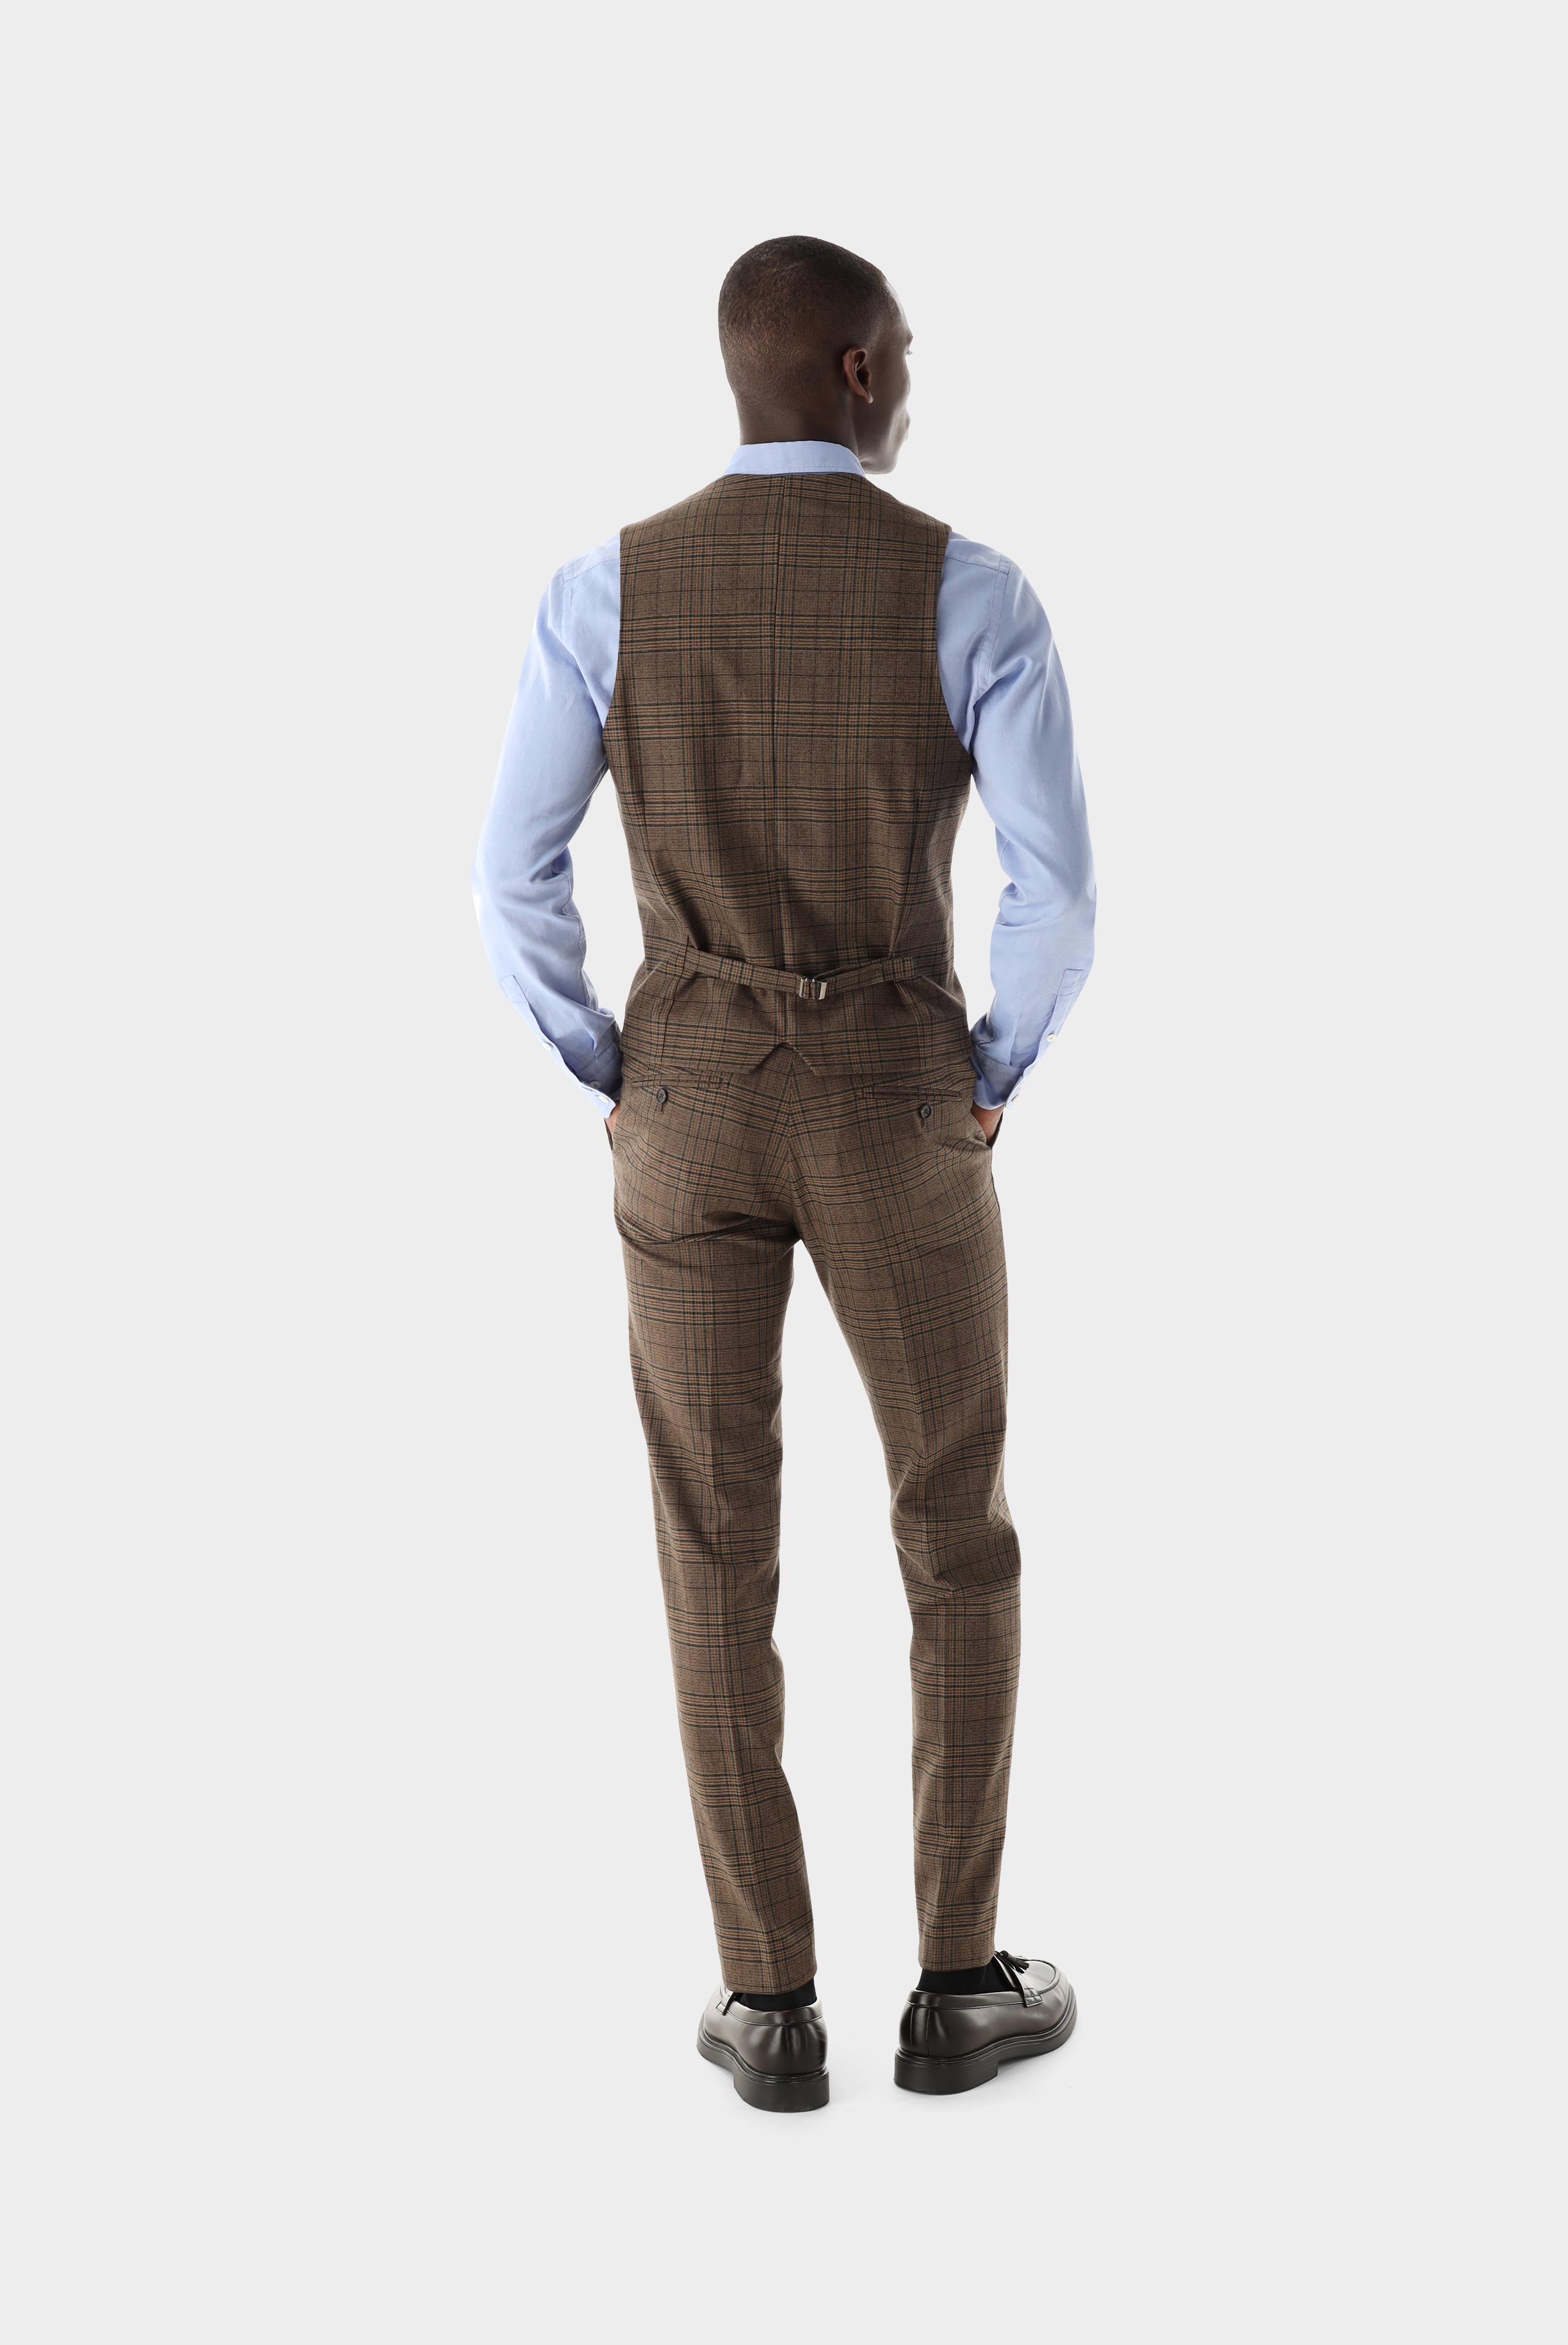 Jeans & Trousers+Checkt trousers slim fit+20.7854.16.H01202.170.48